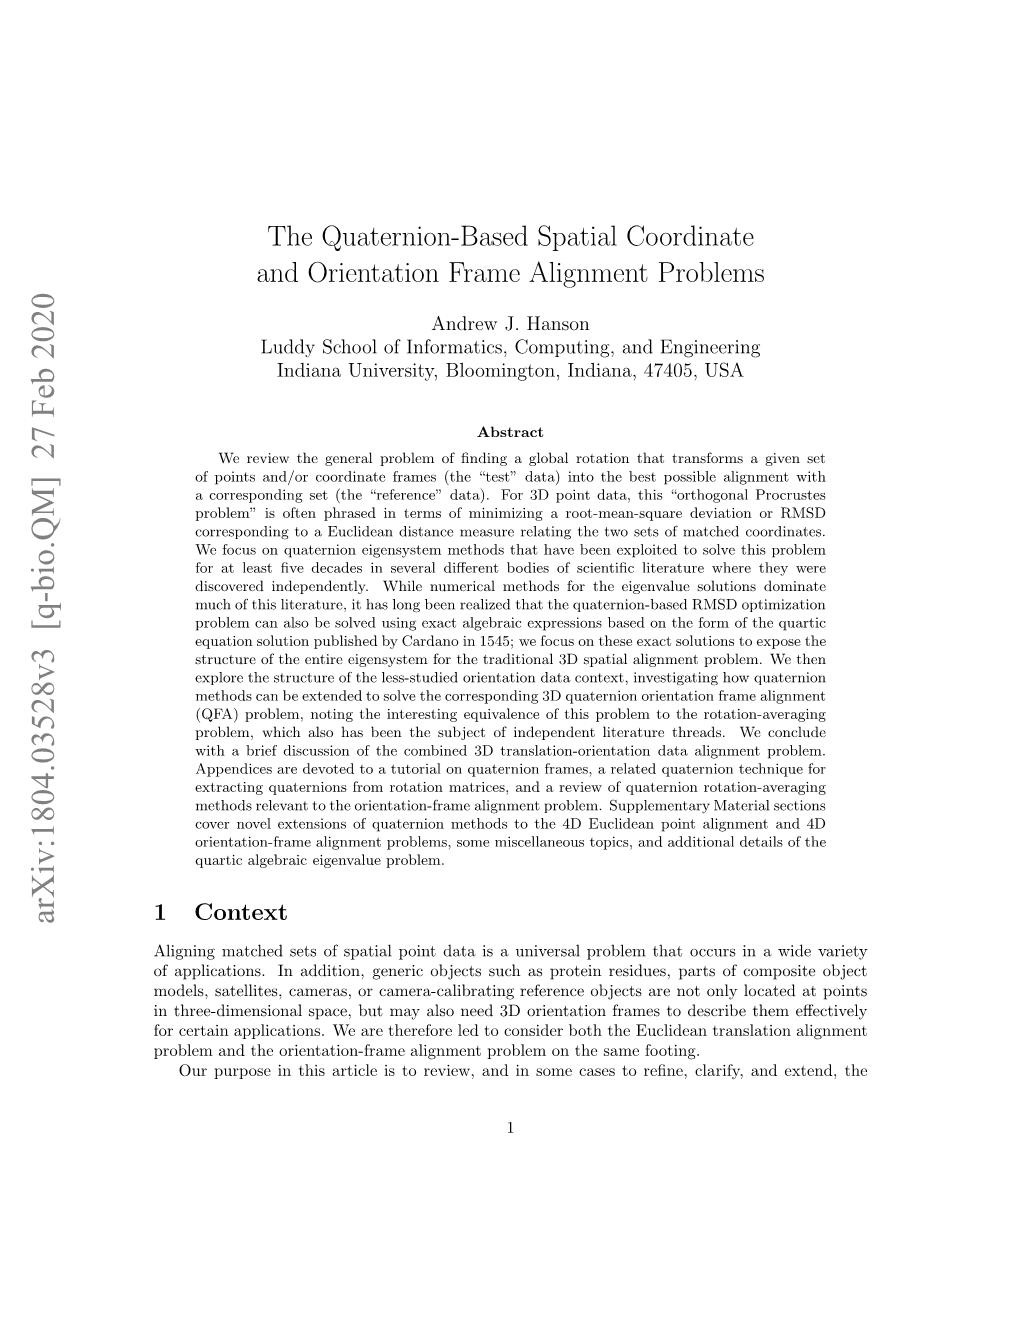 The Quaternion-Based Spatial Coordinate and Orientation Frame Alignment Problems